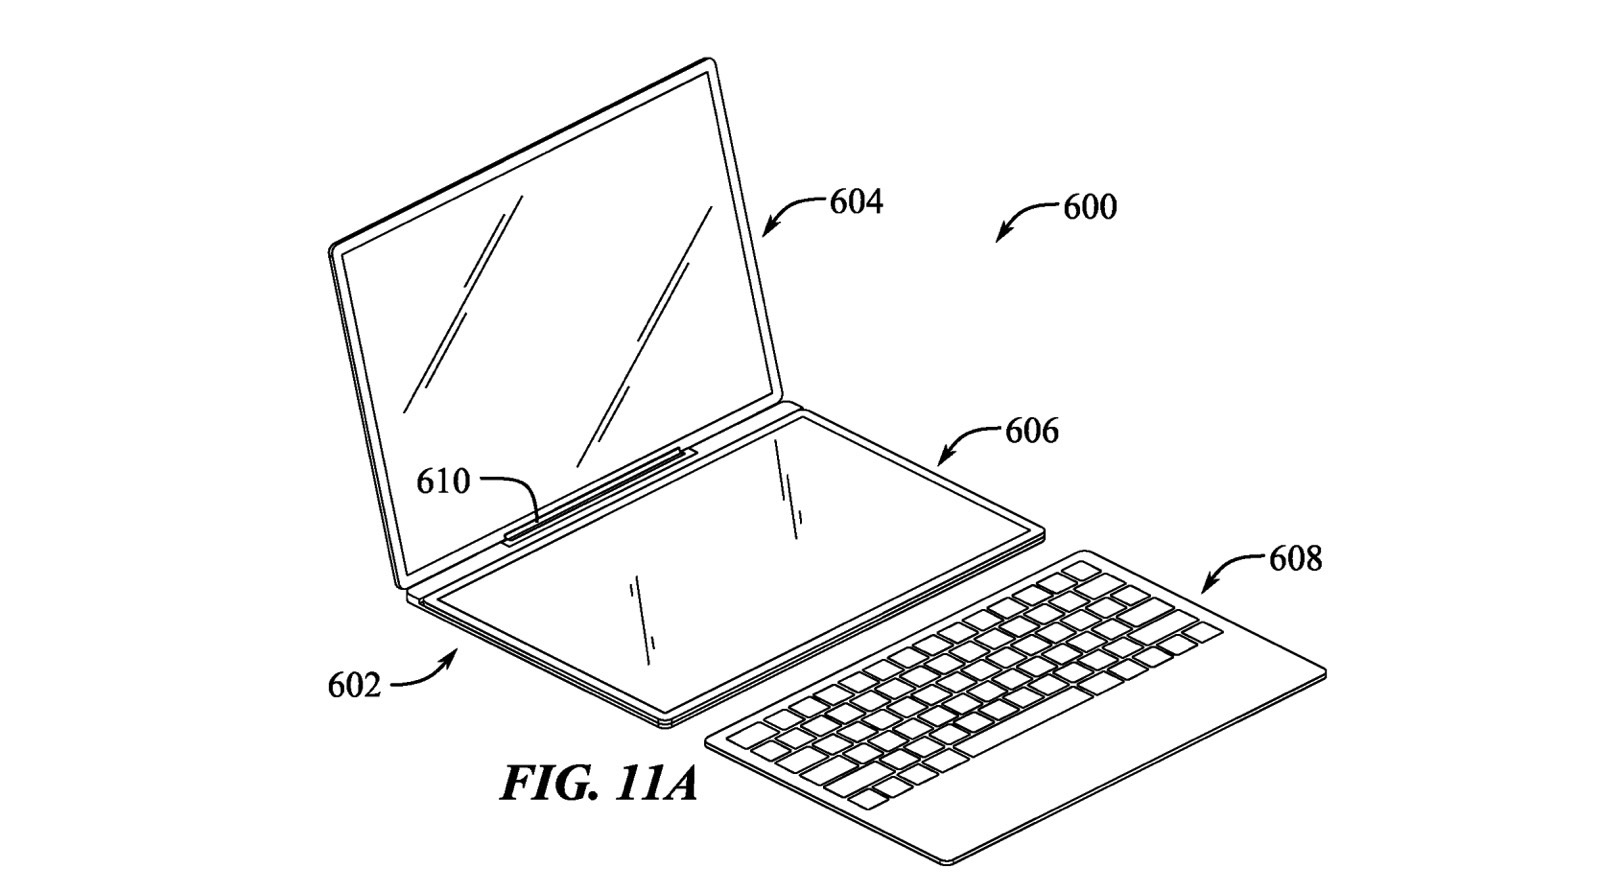 One potential use case for a MacBook featuring two displays connected by a hinge and a separate keyboard.